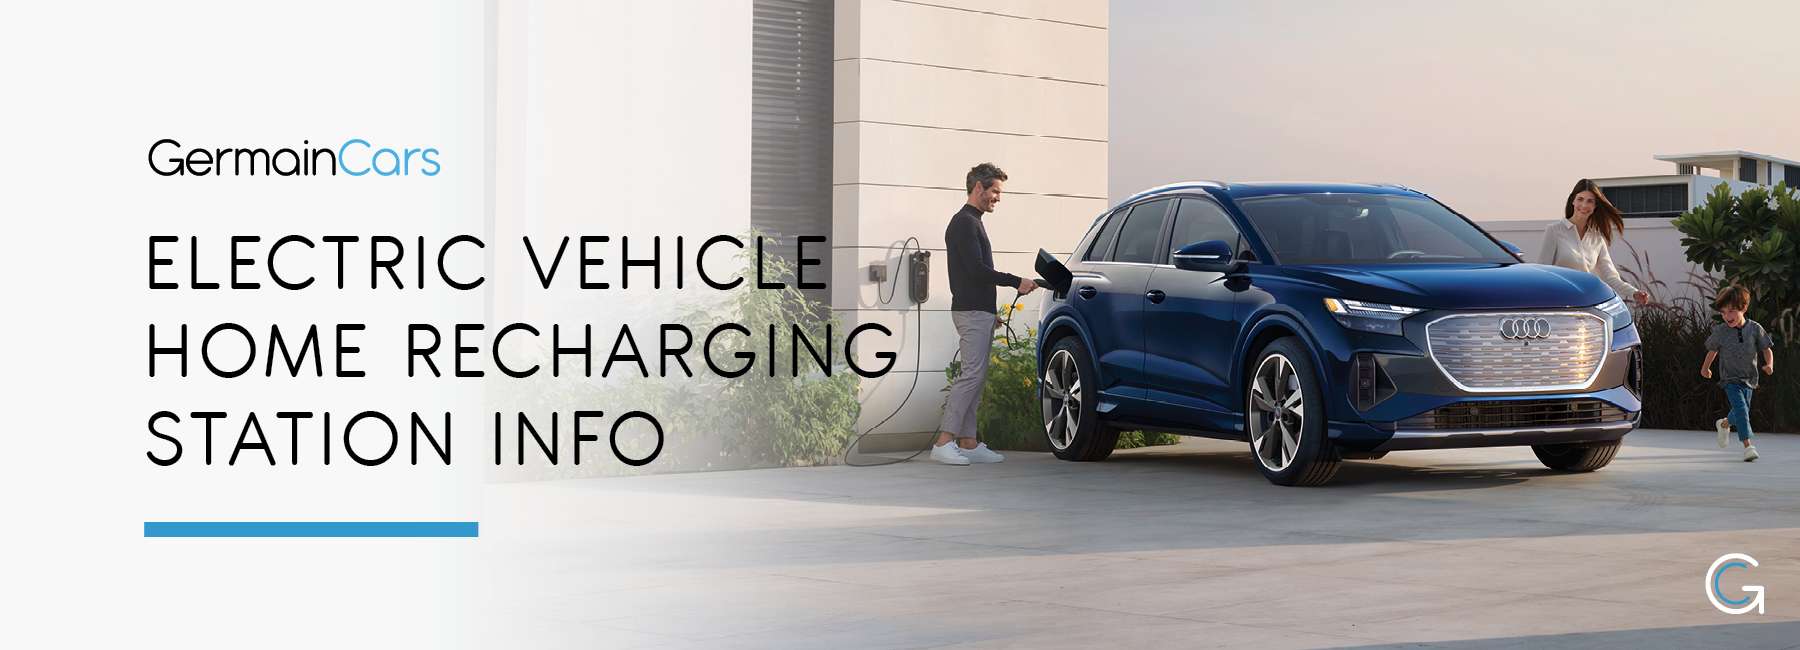 EV Home Charging Station Installation Cost - Germain Cars